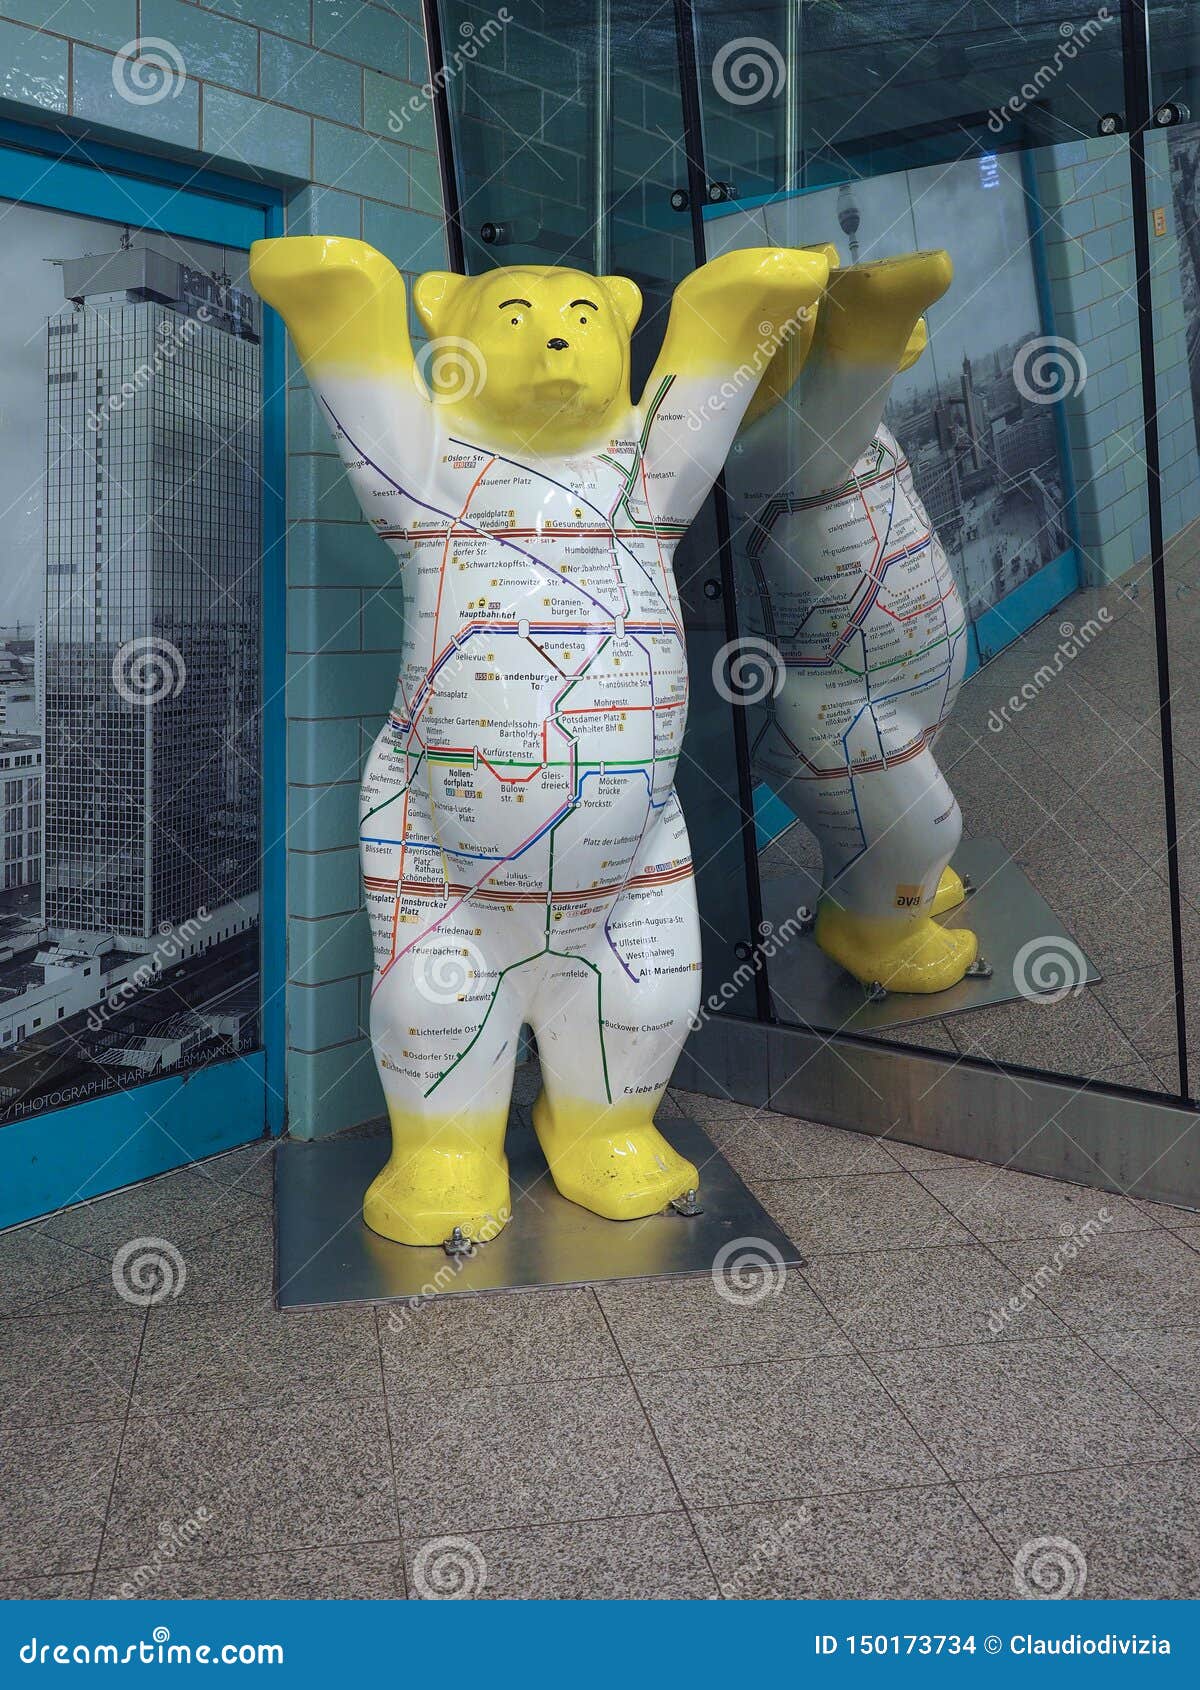 Berlin U Bahn Map Photos Free Royalty Free Stock Photos From Dreamstime